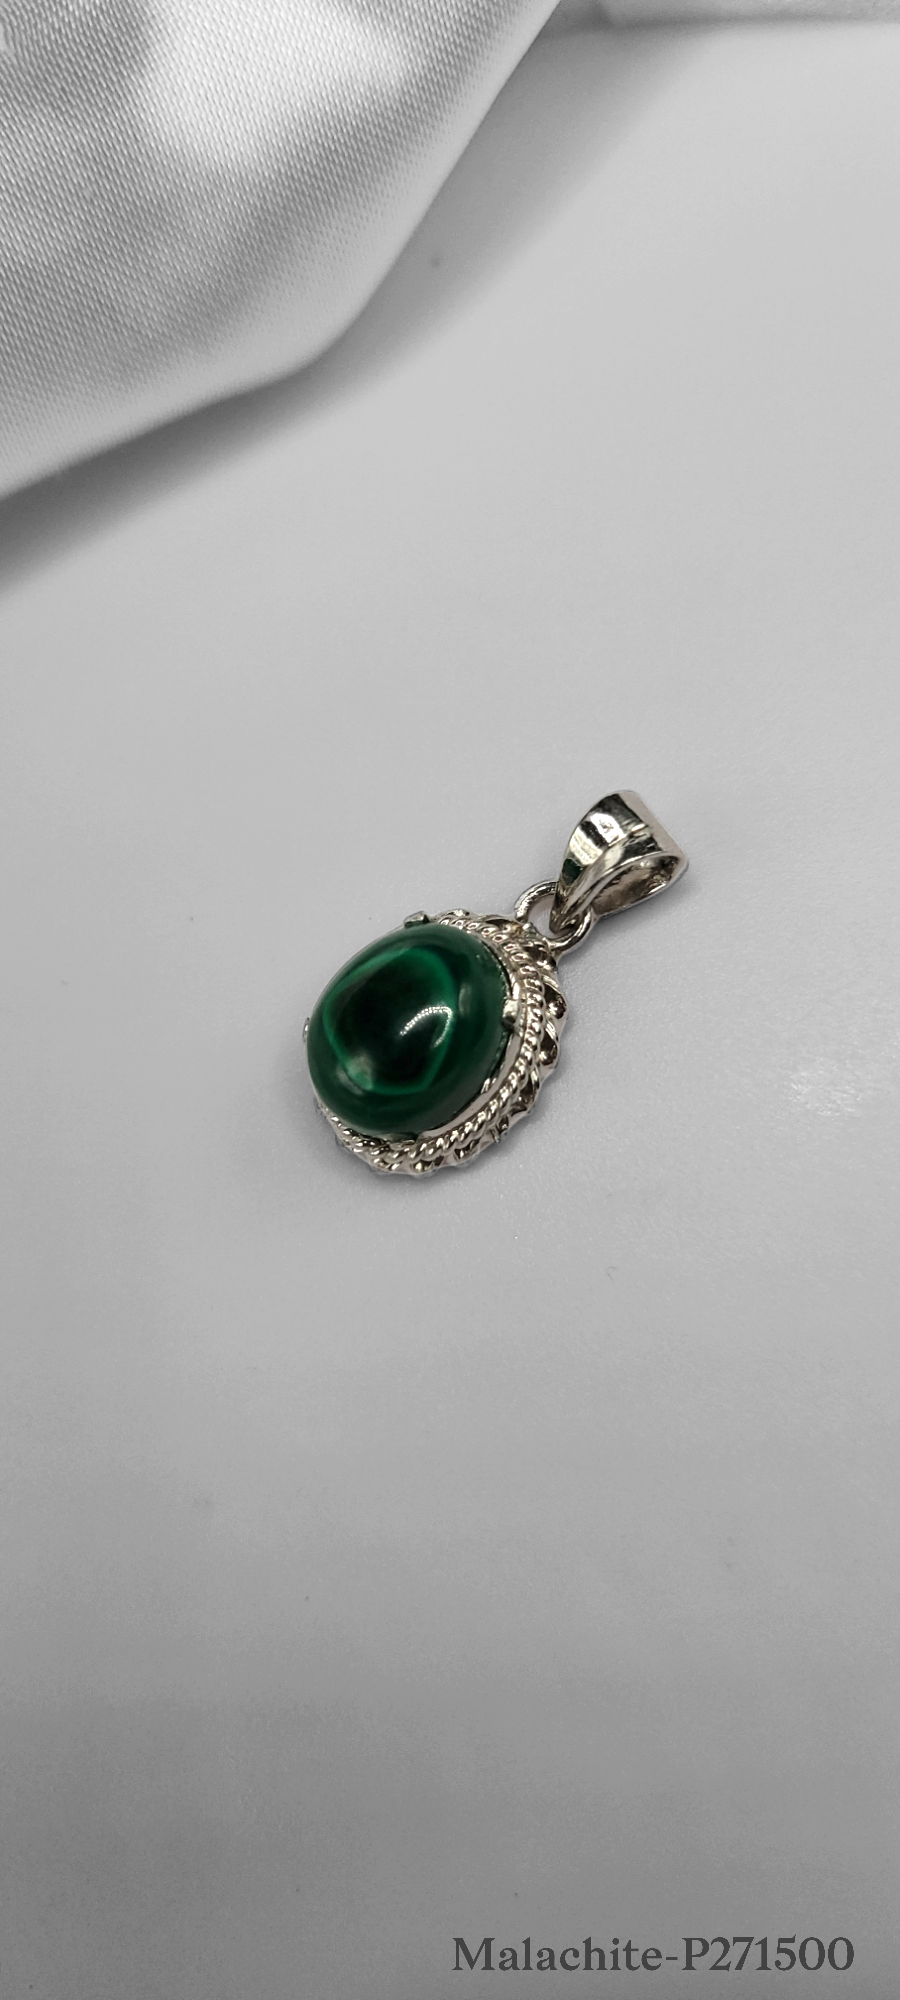 MALACHITE PENDANT ON STERLING SILVER. ONE OF A KIND PIECE. BEST KNOWN AS THE PROTECTIVE & HEALING STONE.